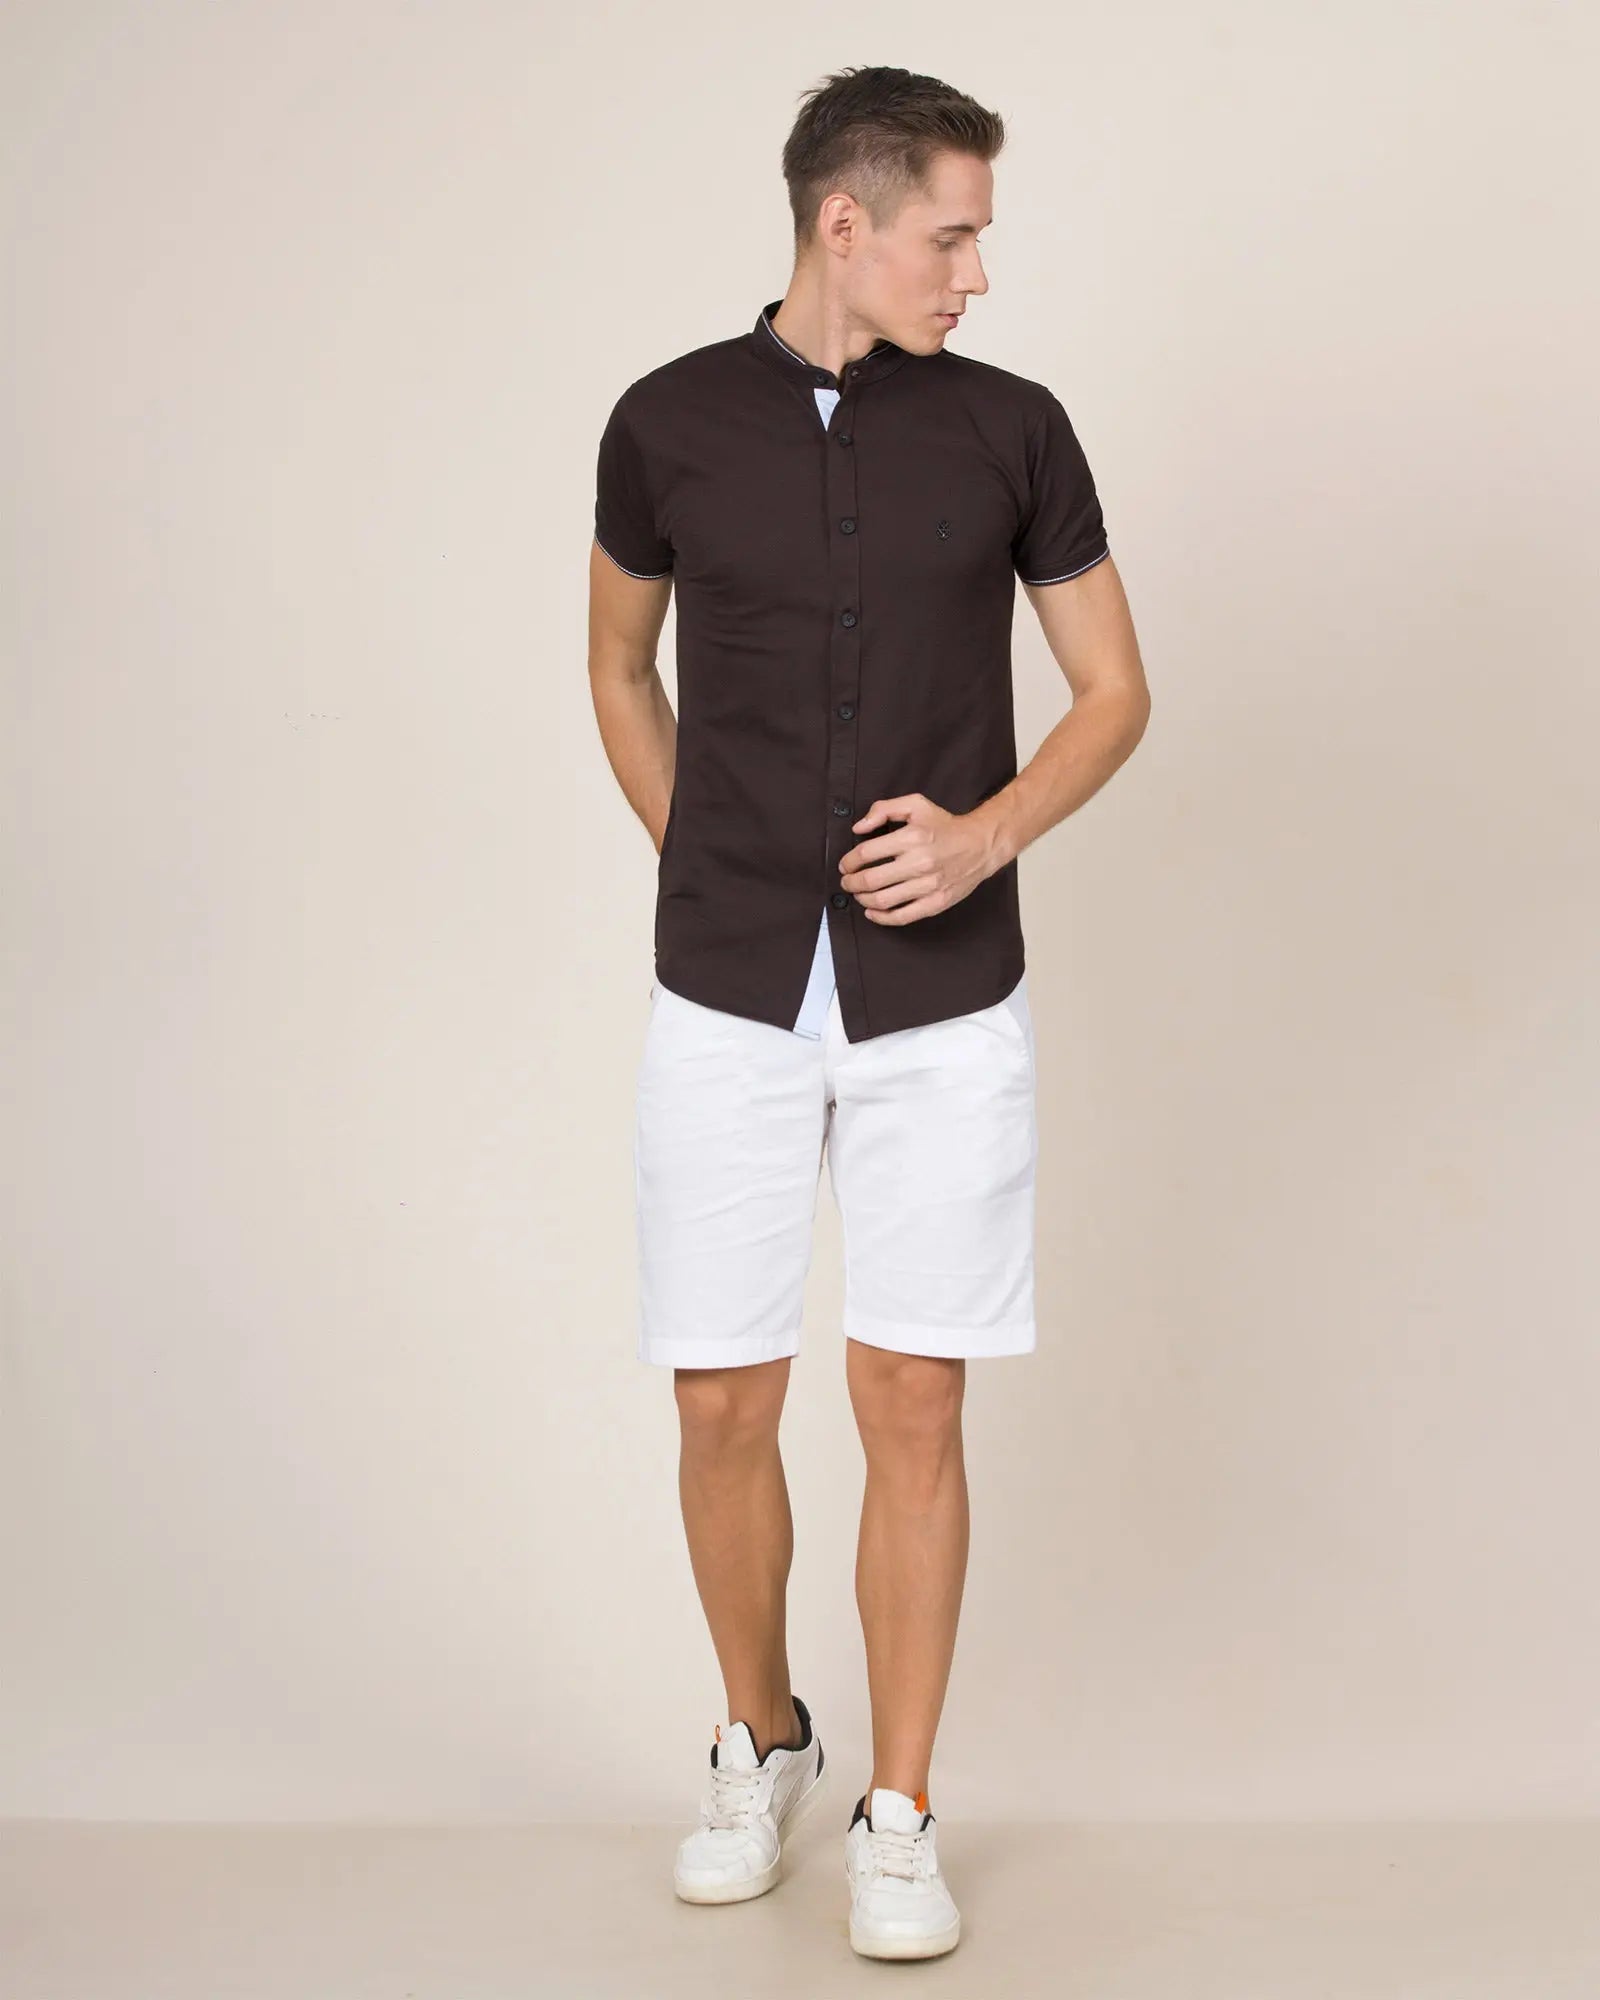 LCY London | Capsule Collection - Men&#39;s Hybrid Short Sleeved Shirt | Full Buttoned LCY London